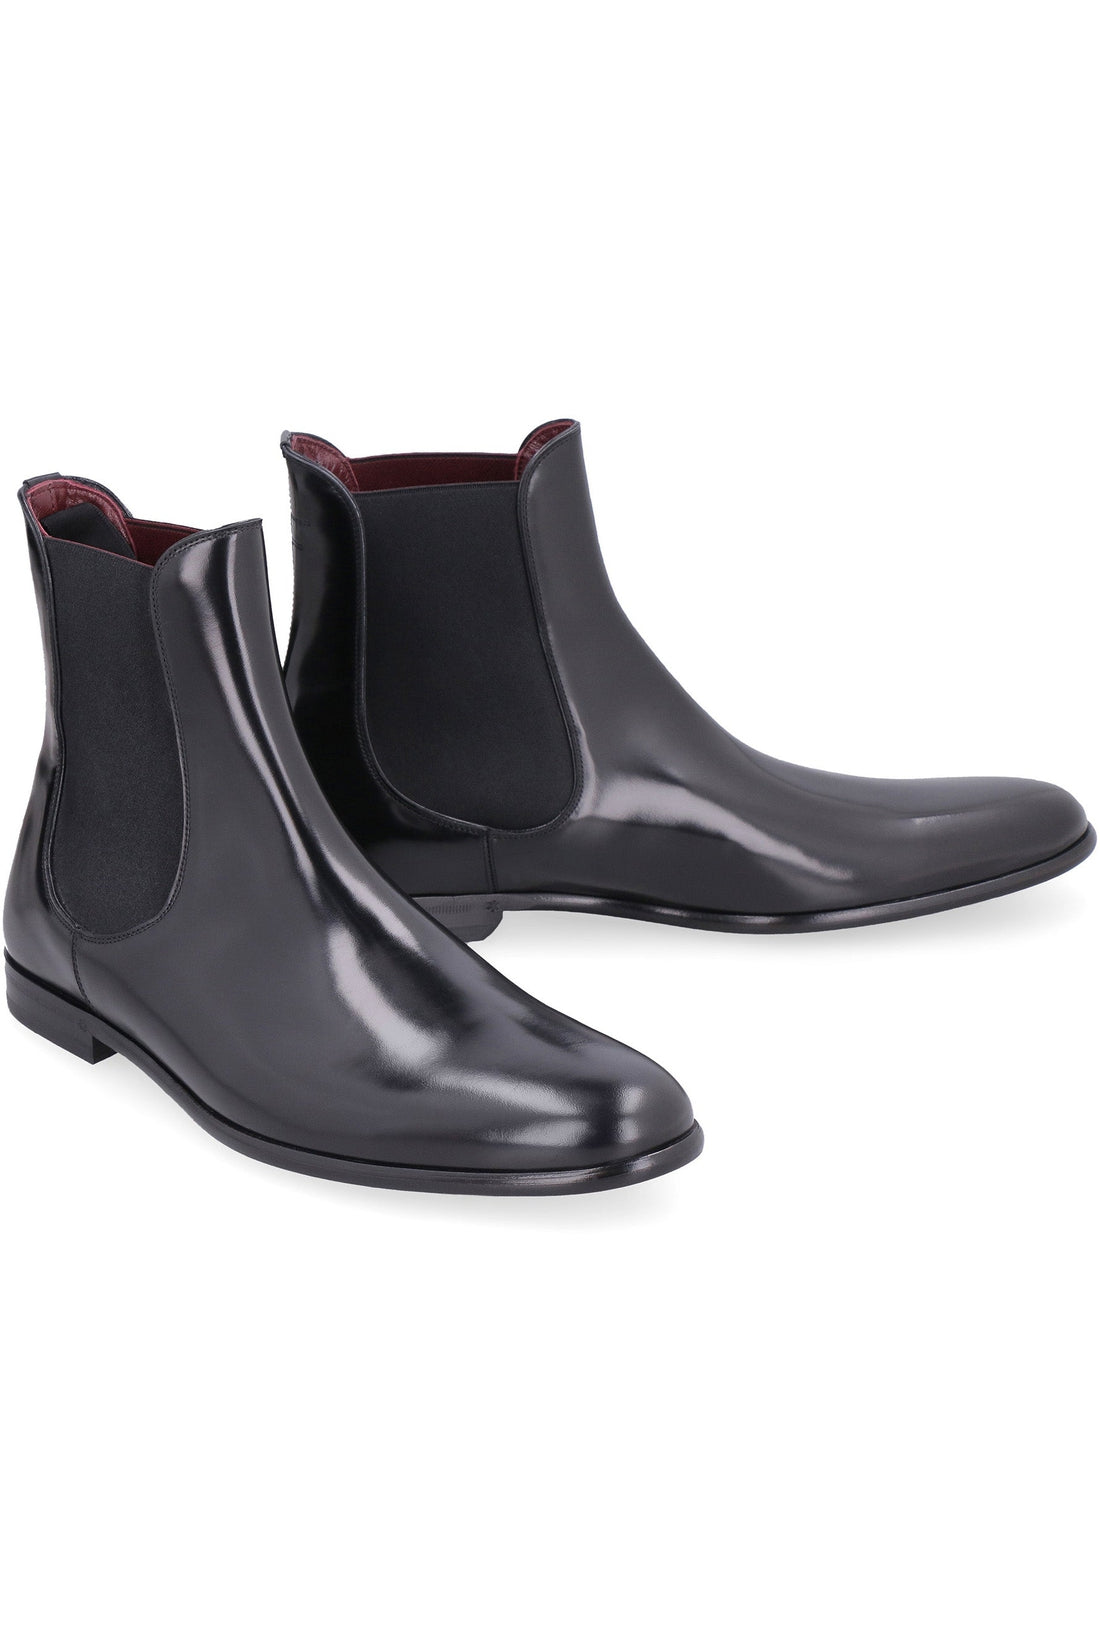 Dolce & Gabbana-OUTLET-SALE-Spazzolato leather Chelsea boots-ARCHIVIST